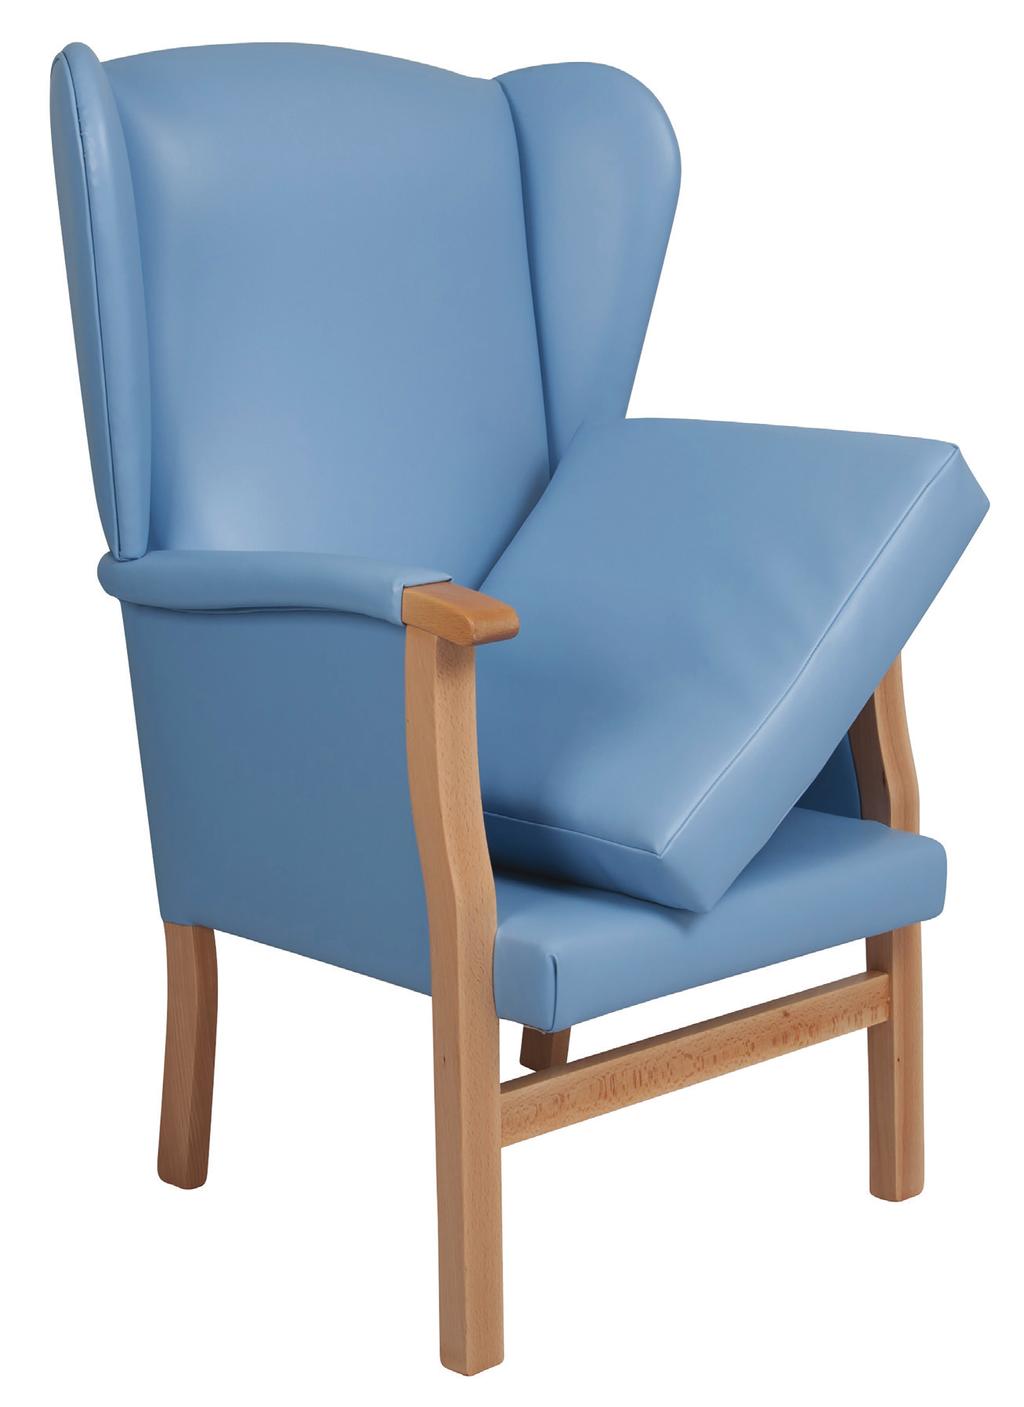 MEDIC Community Lounge Chairs 160Kg 225Kg Ideal for all bedside and communal locations in the NHS, nursing homes and residential care environments.